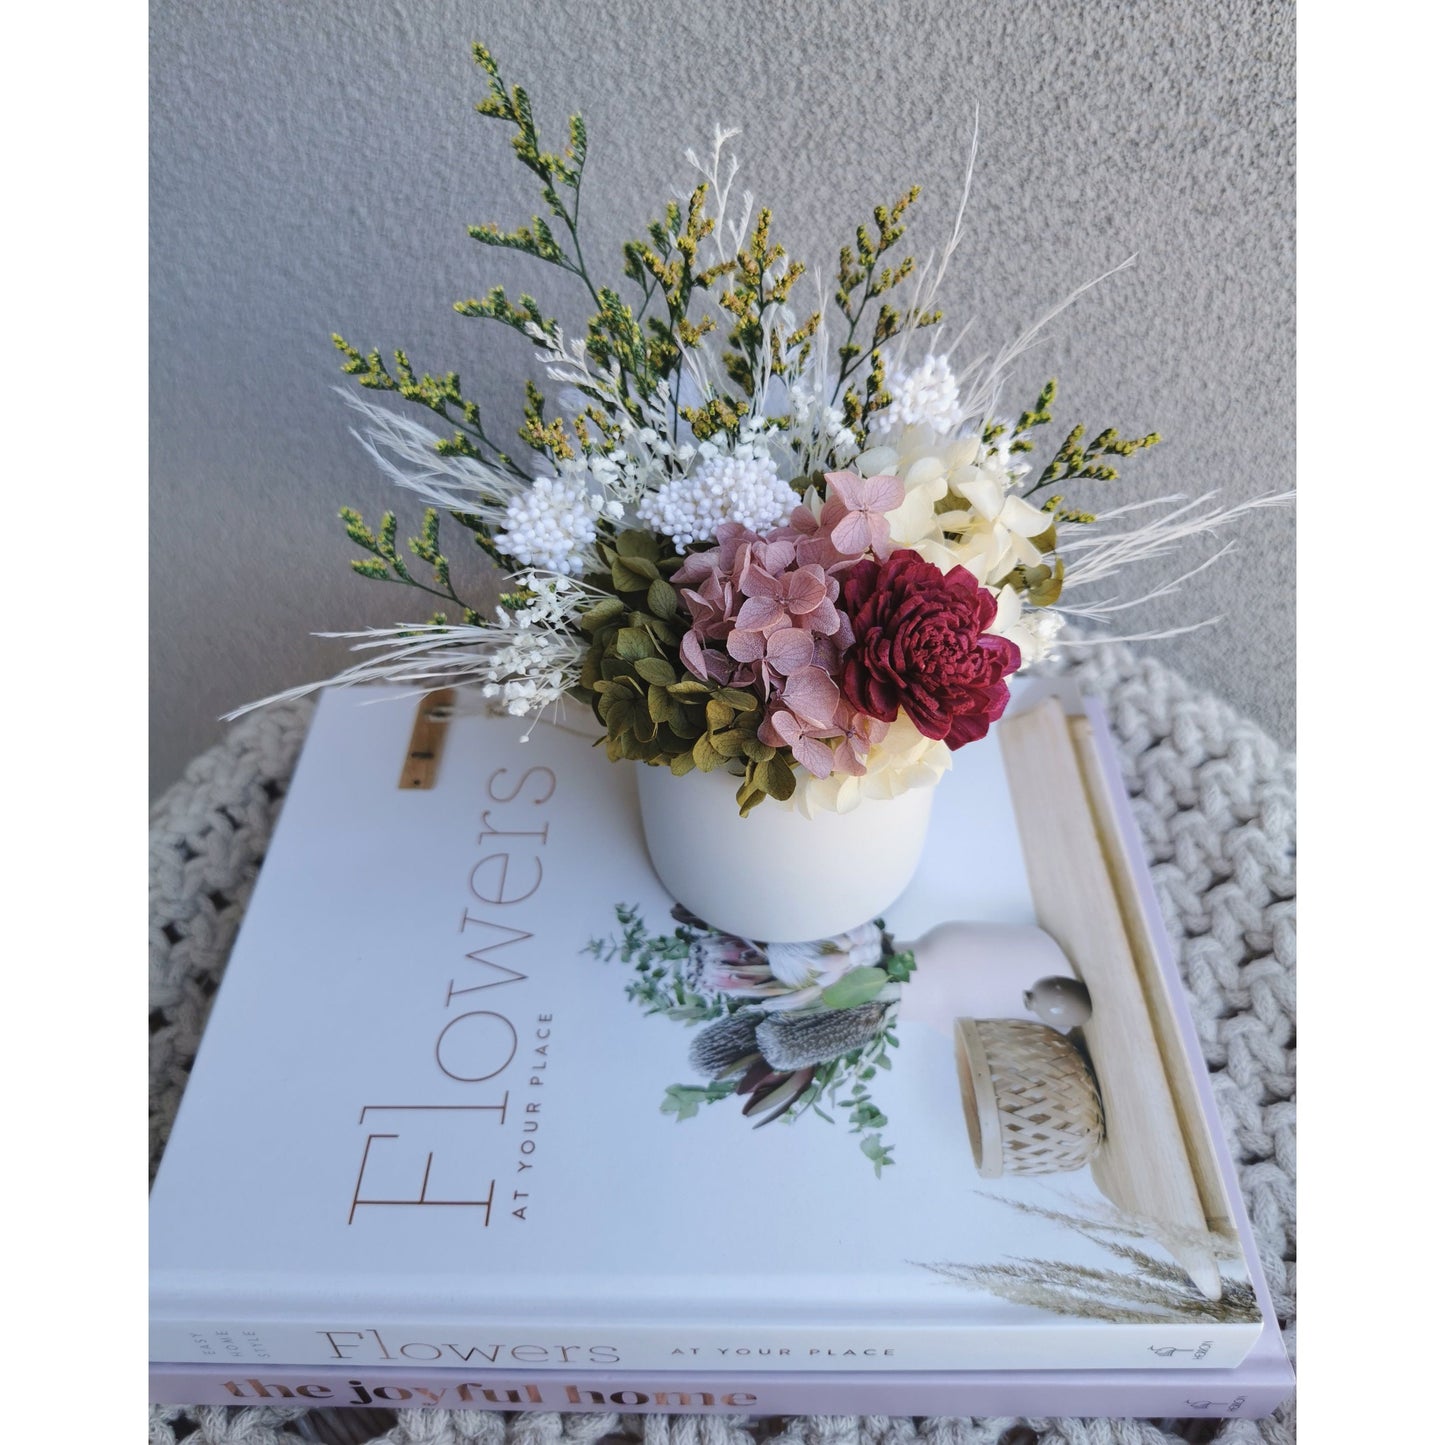 Dried & Preserved flower arrangement with green , white, yellow, pink & burgundy colours. Photo shows arrangement sitting on books in front of a blank wall with a more birds eye view